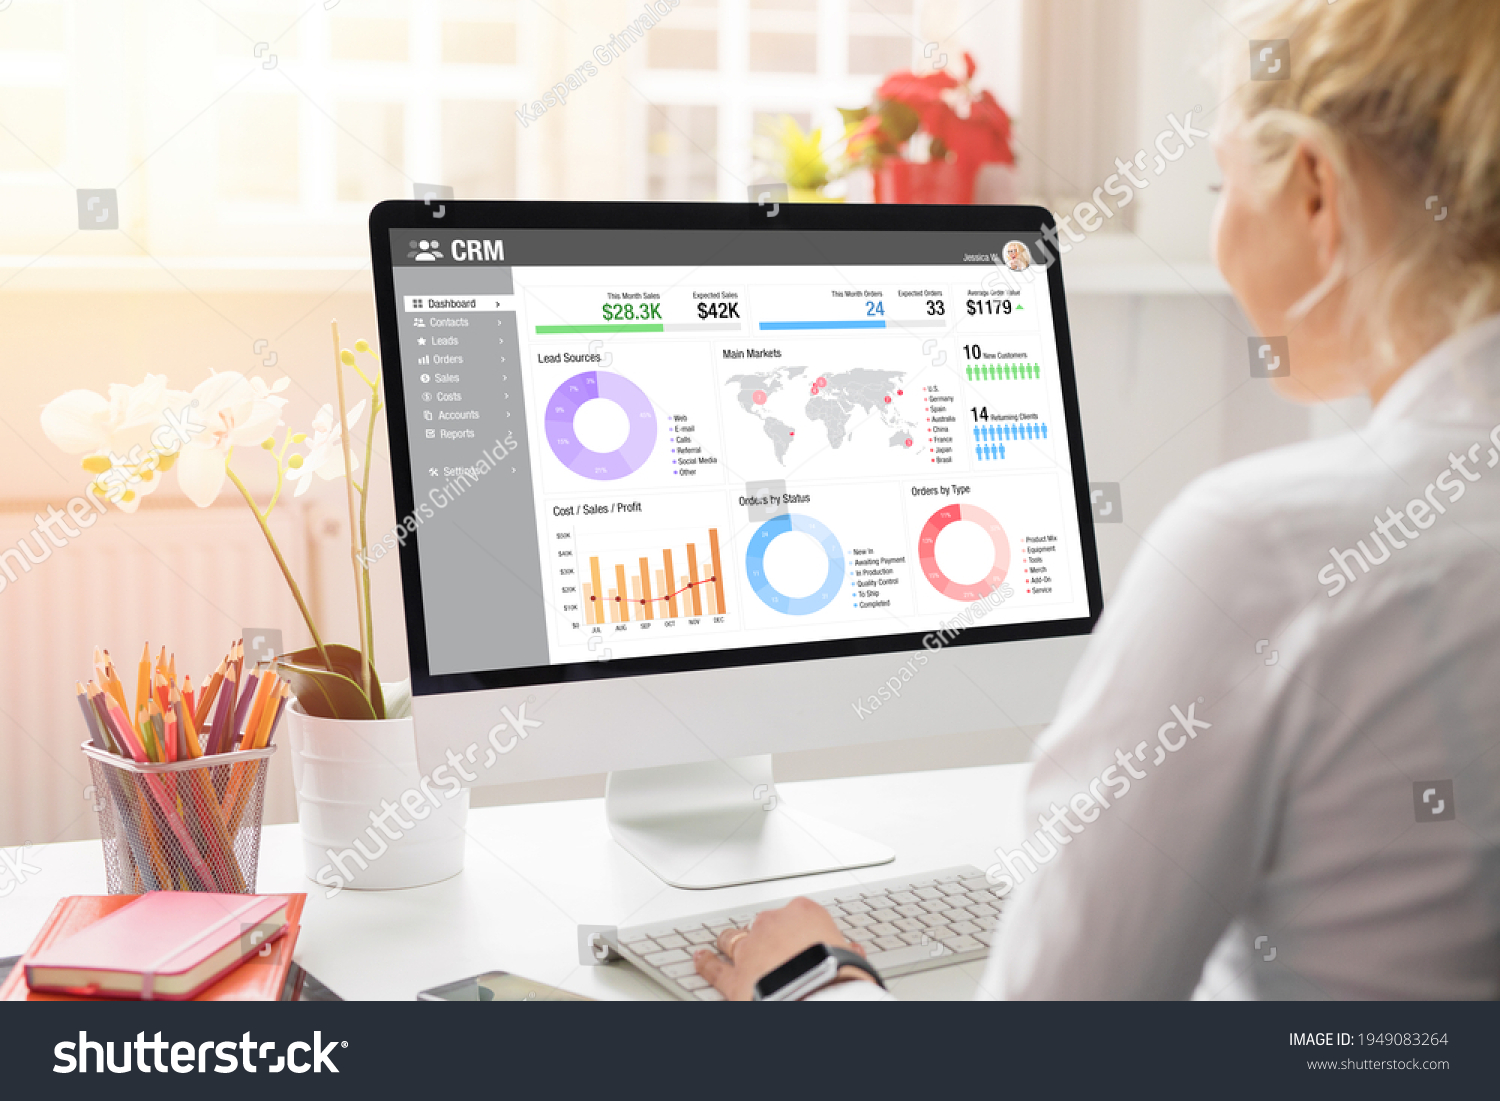 Girl working with desktop computer in office. Viewing different charts, graphs and infographics of CRM on the computer screen. #1949083264